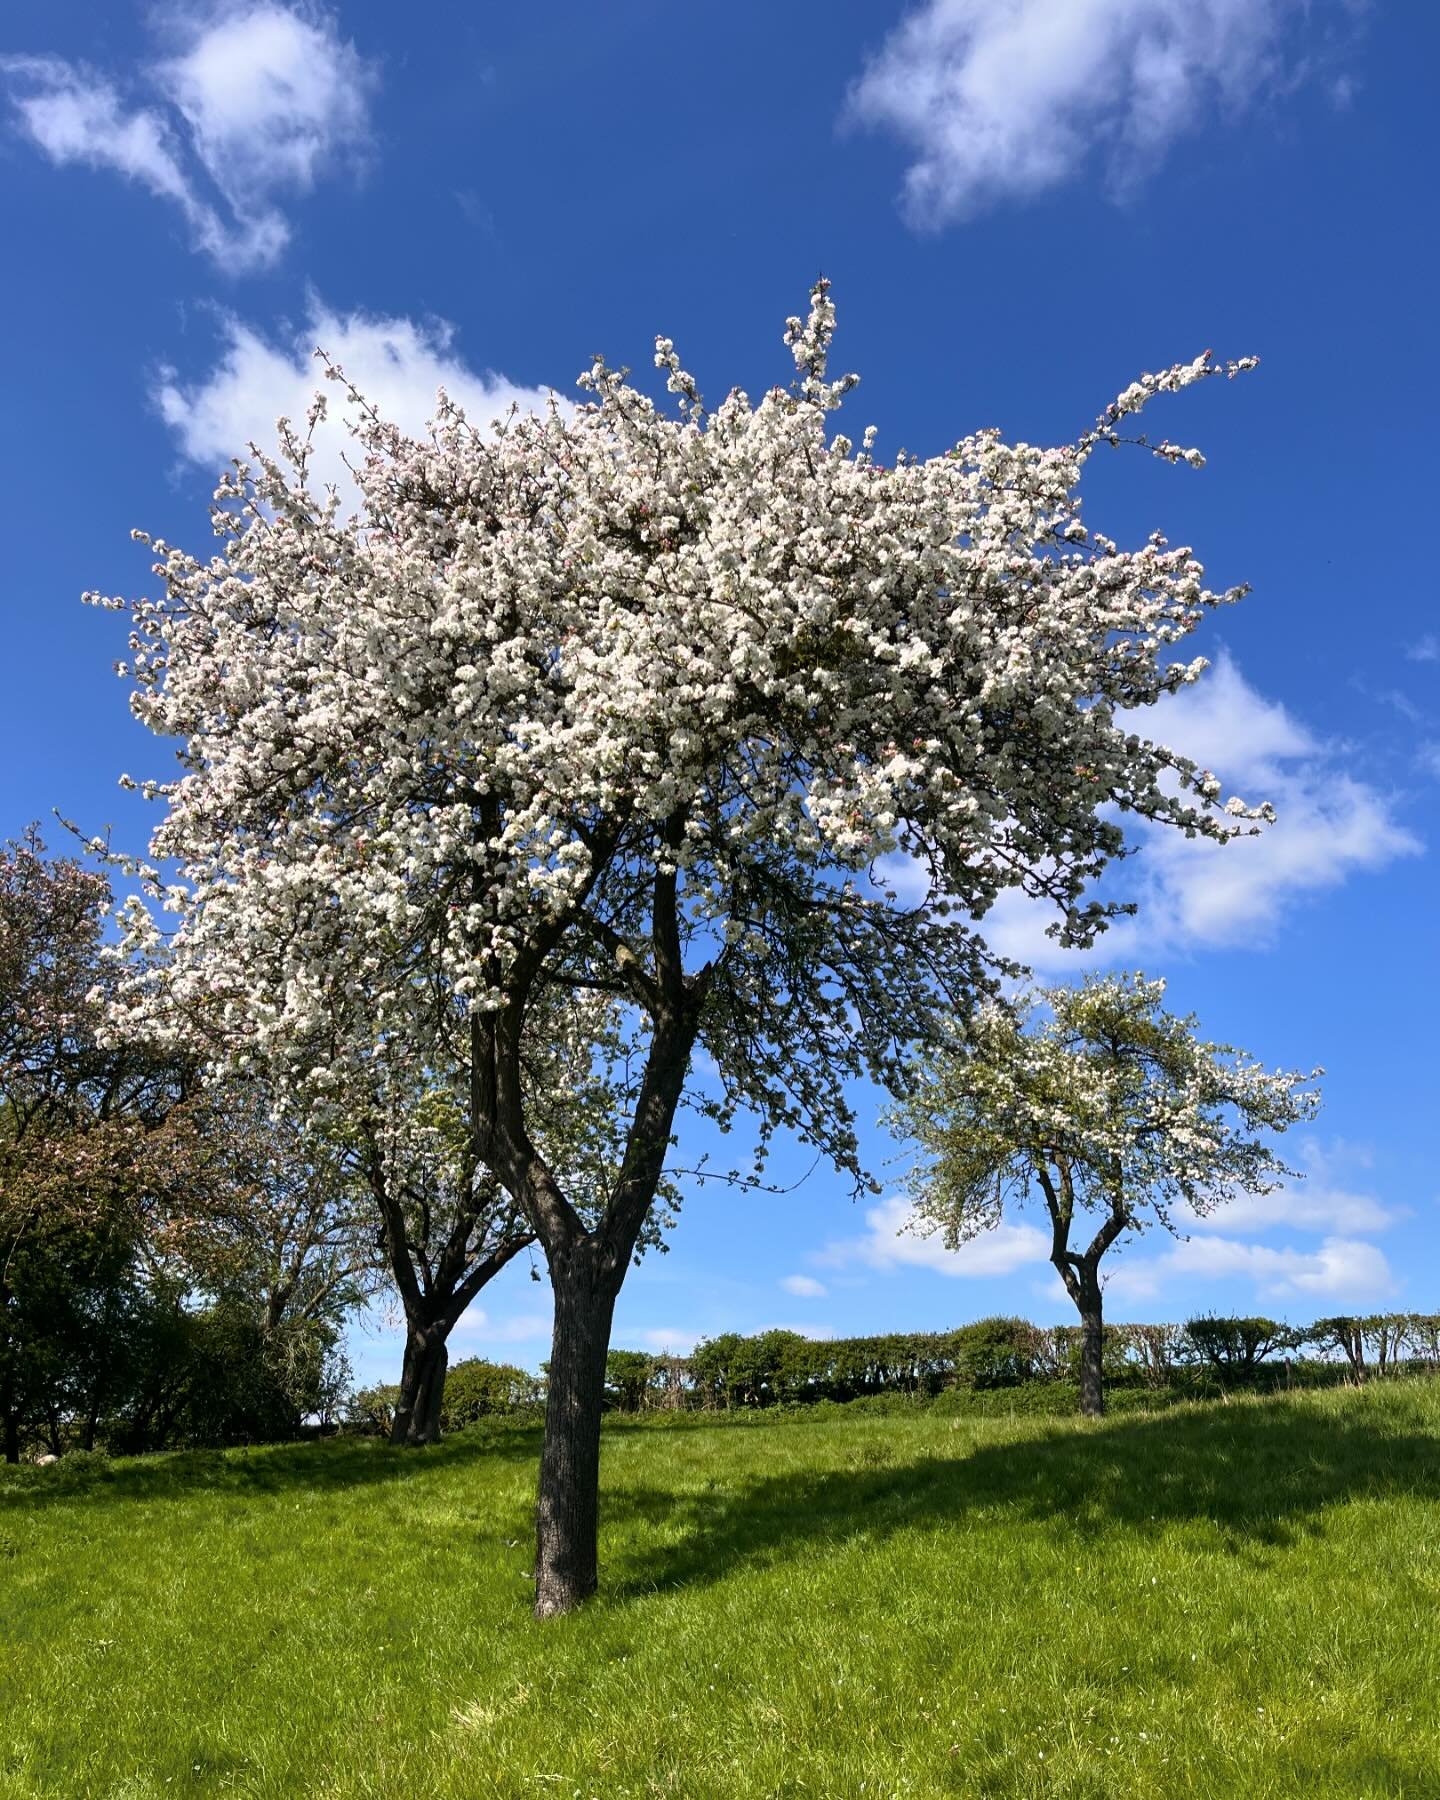 Hello sunshine ☀️ 

Some serious gratitude for this glorious day on the farm.. 🌳 

Wishing everyone a wonderful bank holiday weekend.

#sun #happy #trees #blossom #simple #simplethings